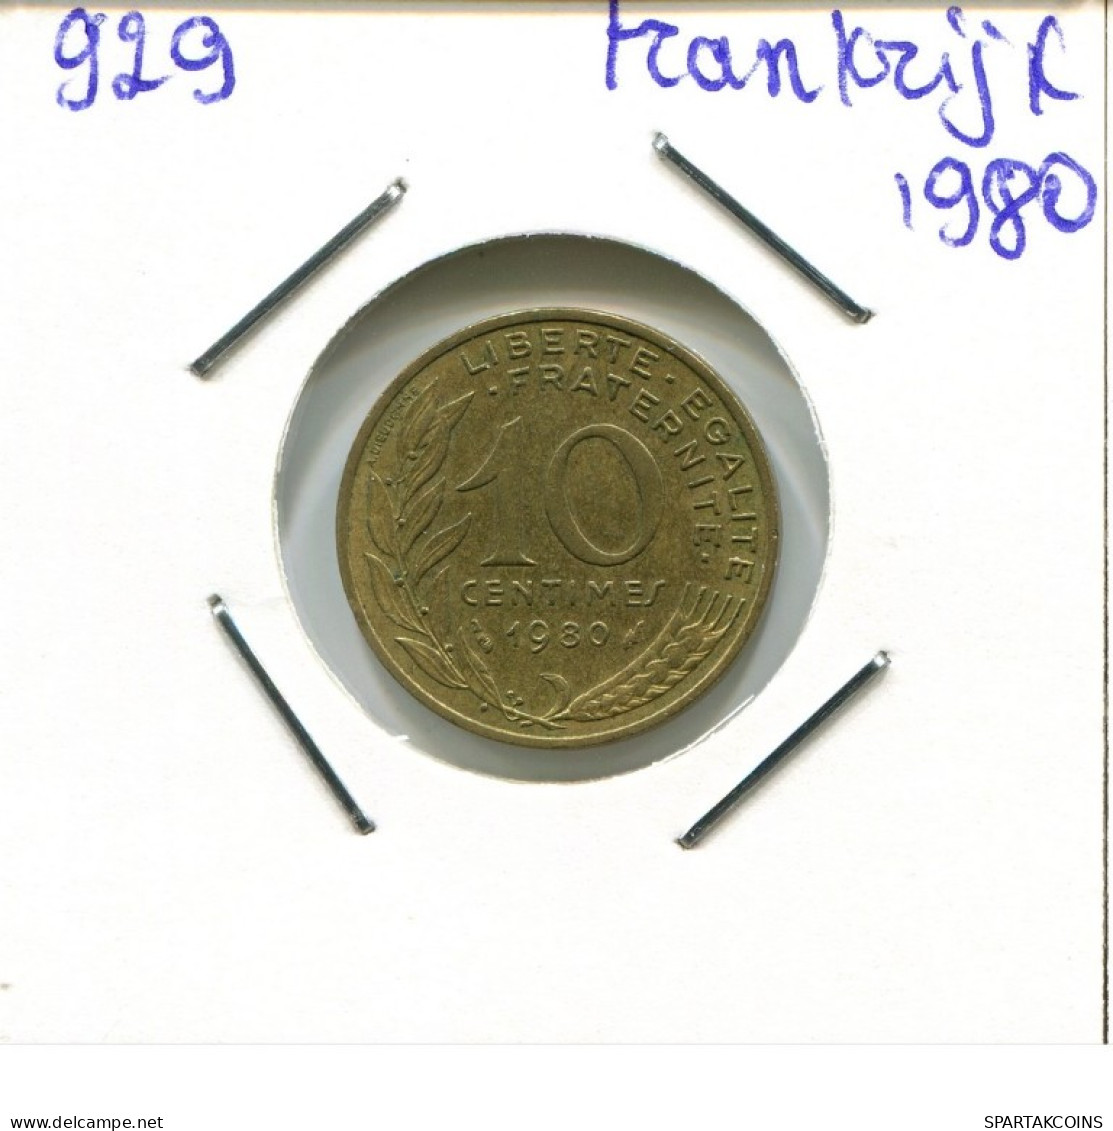 10 CENTIMES 1980 FRANCE Coin French Coin #AN138.U.A - 10 Centimes